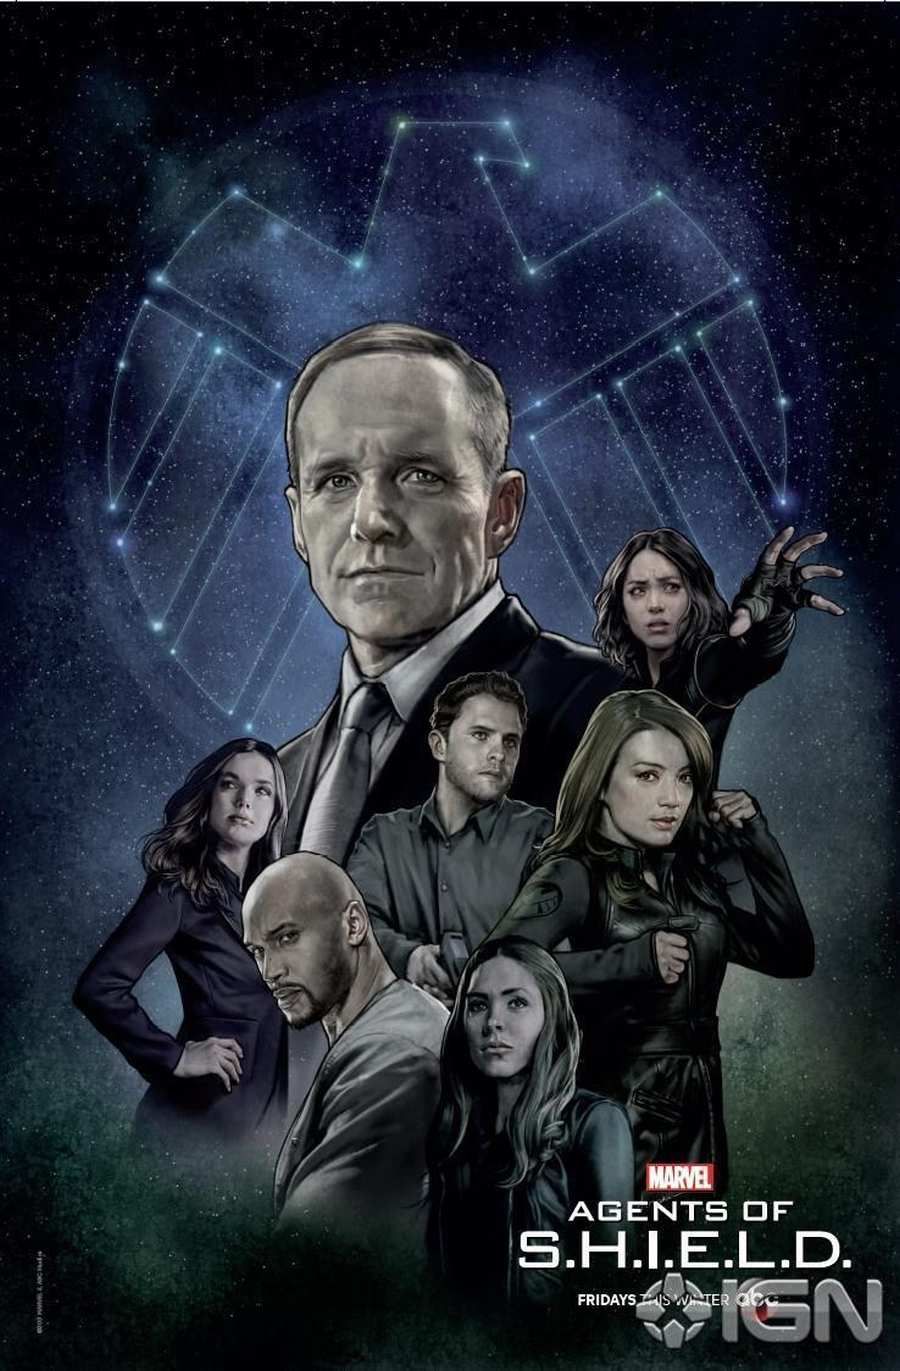 Agents of SHIELD premieres this winter after Marvels Inhumans.